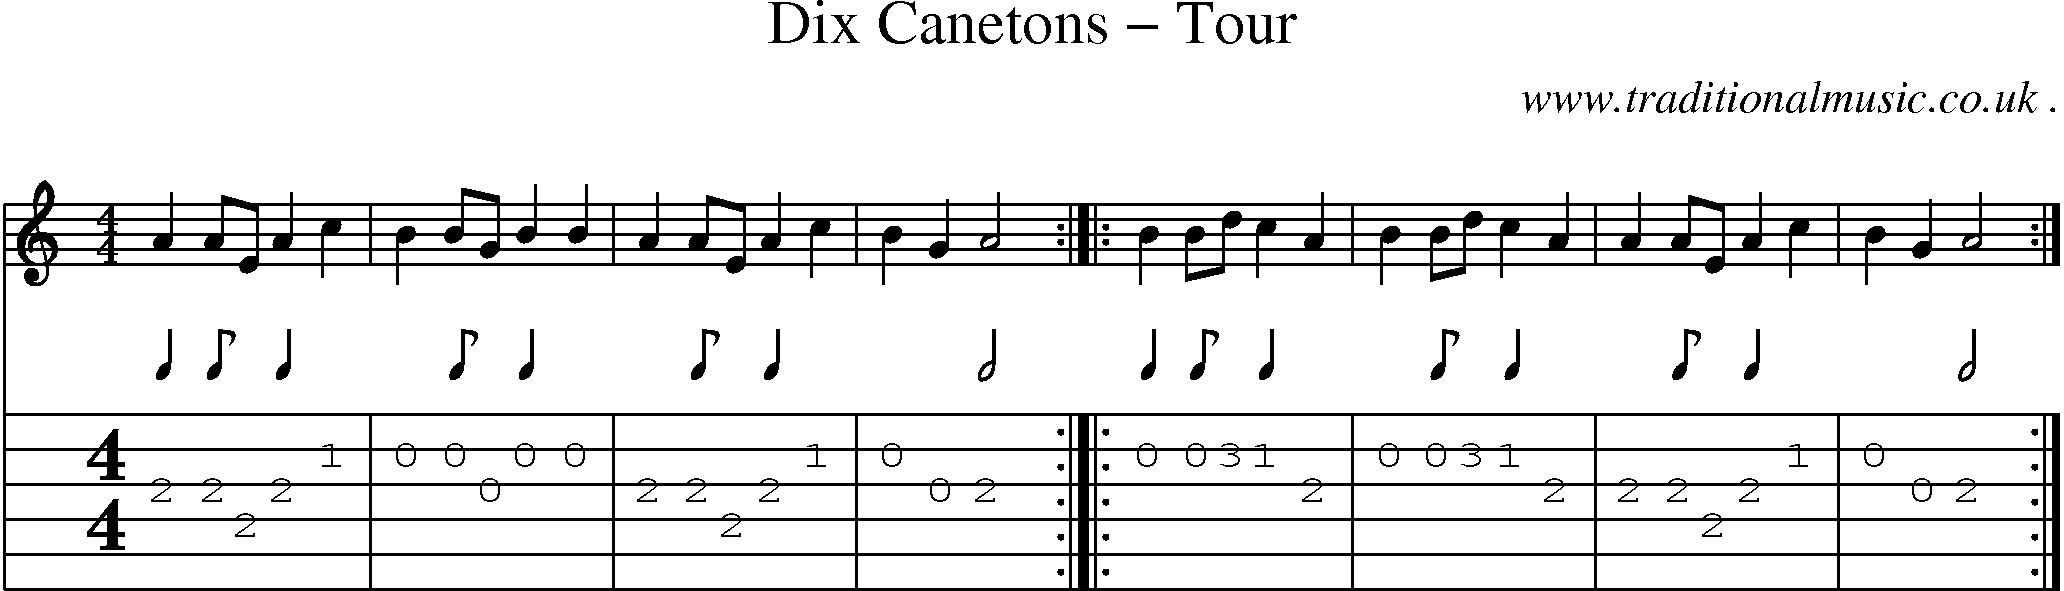 Sheet-Music and Guitar Tabs for Dix Canetons Tour